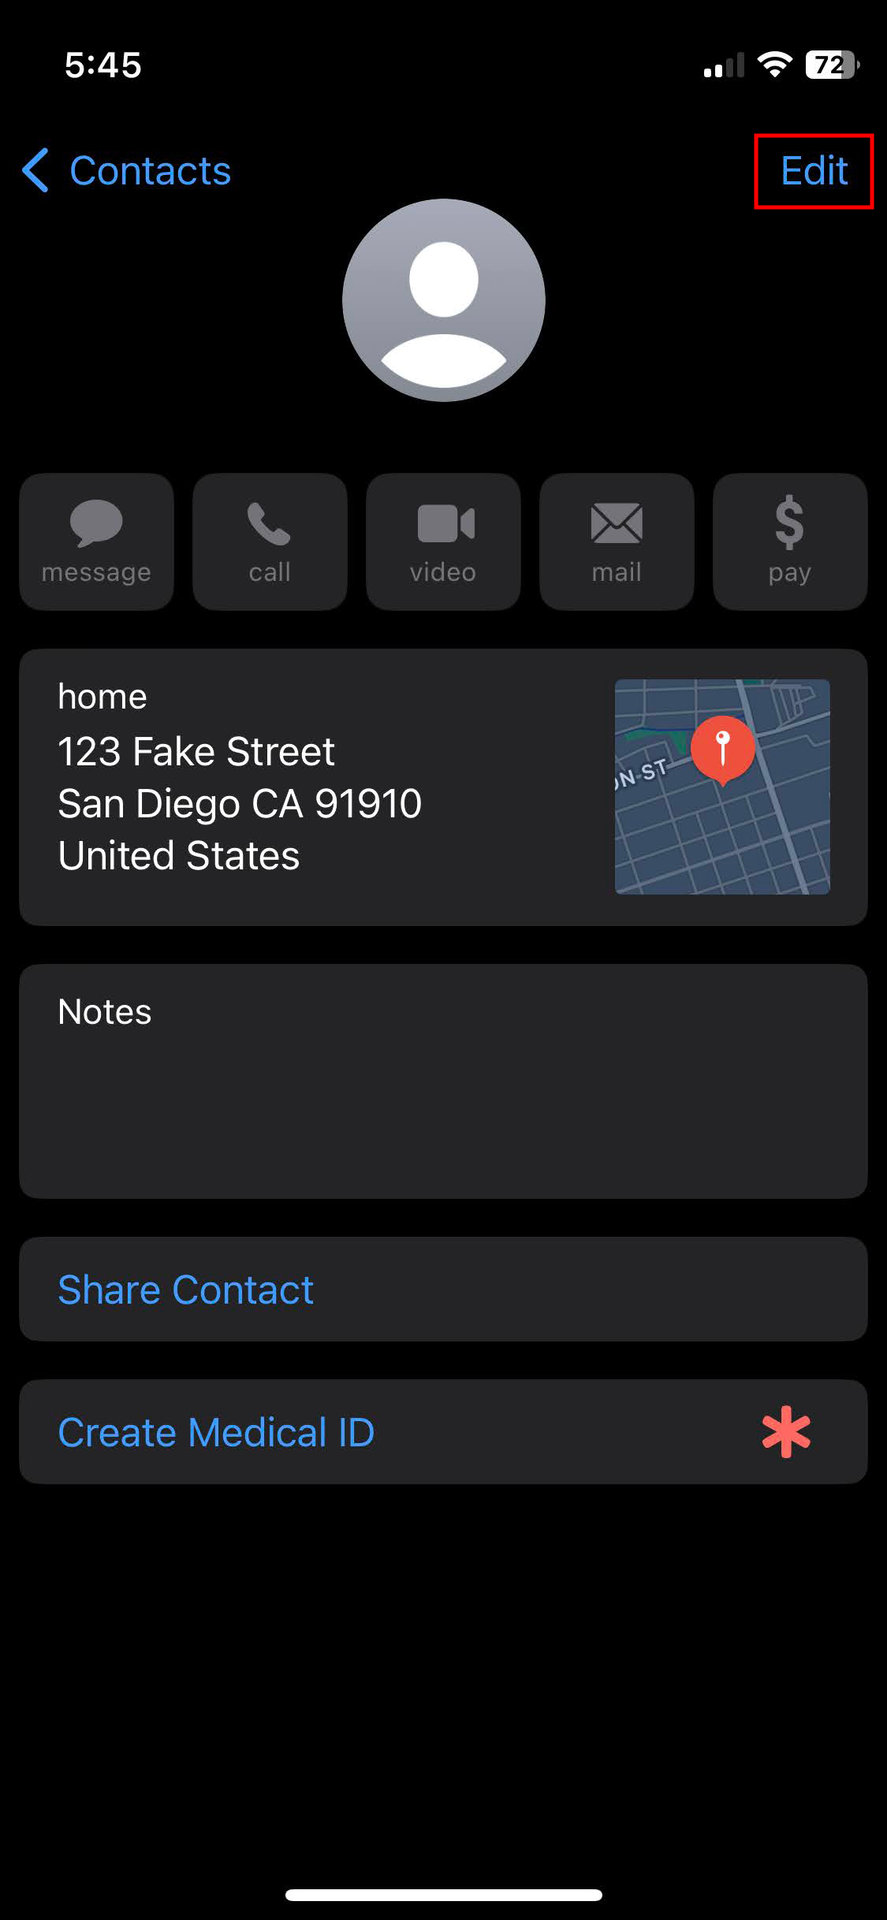 How to change your home address in the Contacts app on iPhone 2